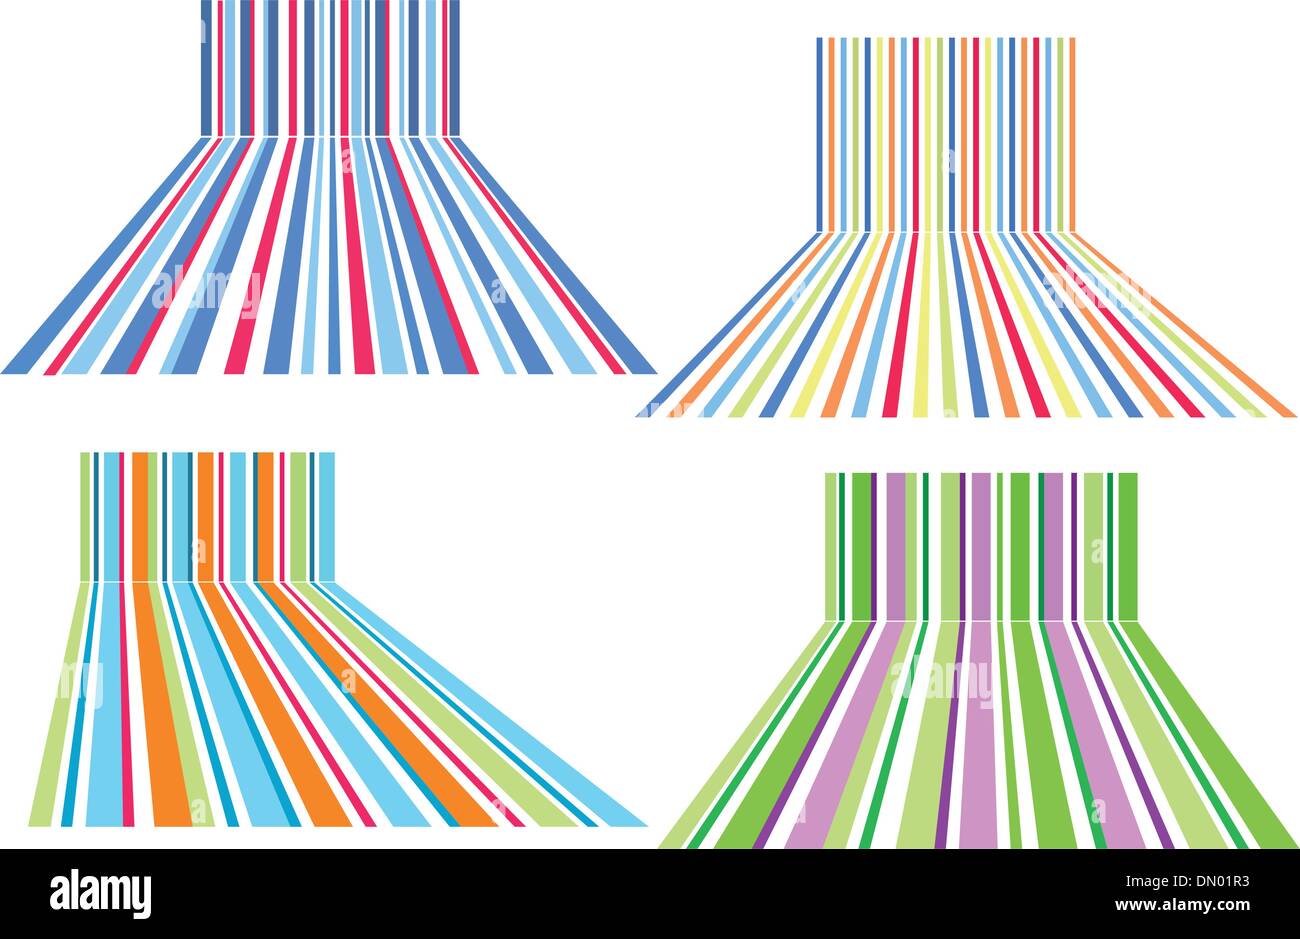 colorful striped backgrounds, vector Stock Vector